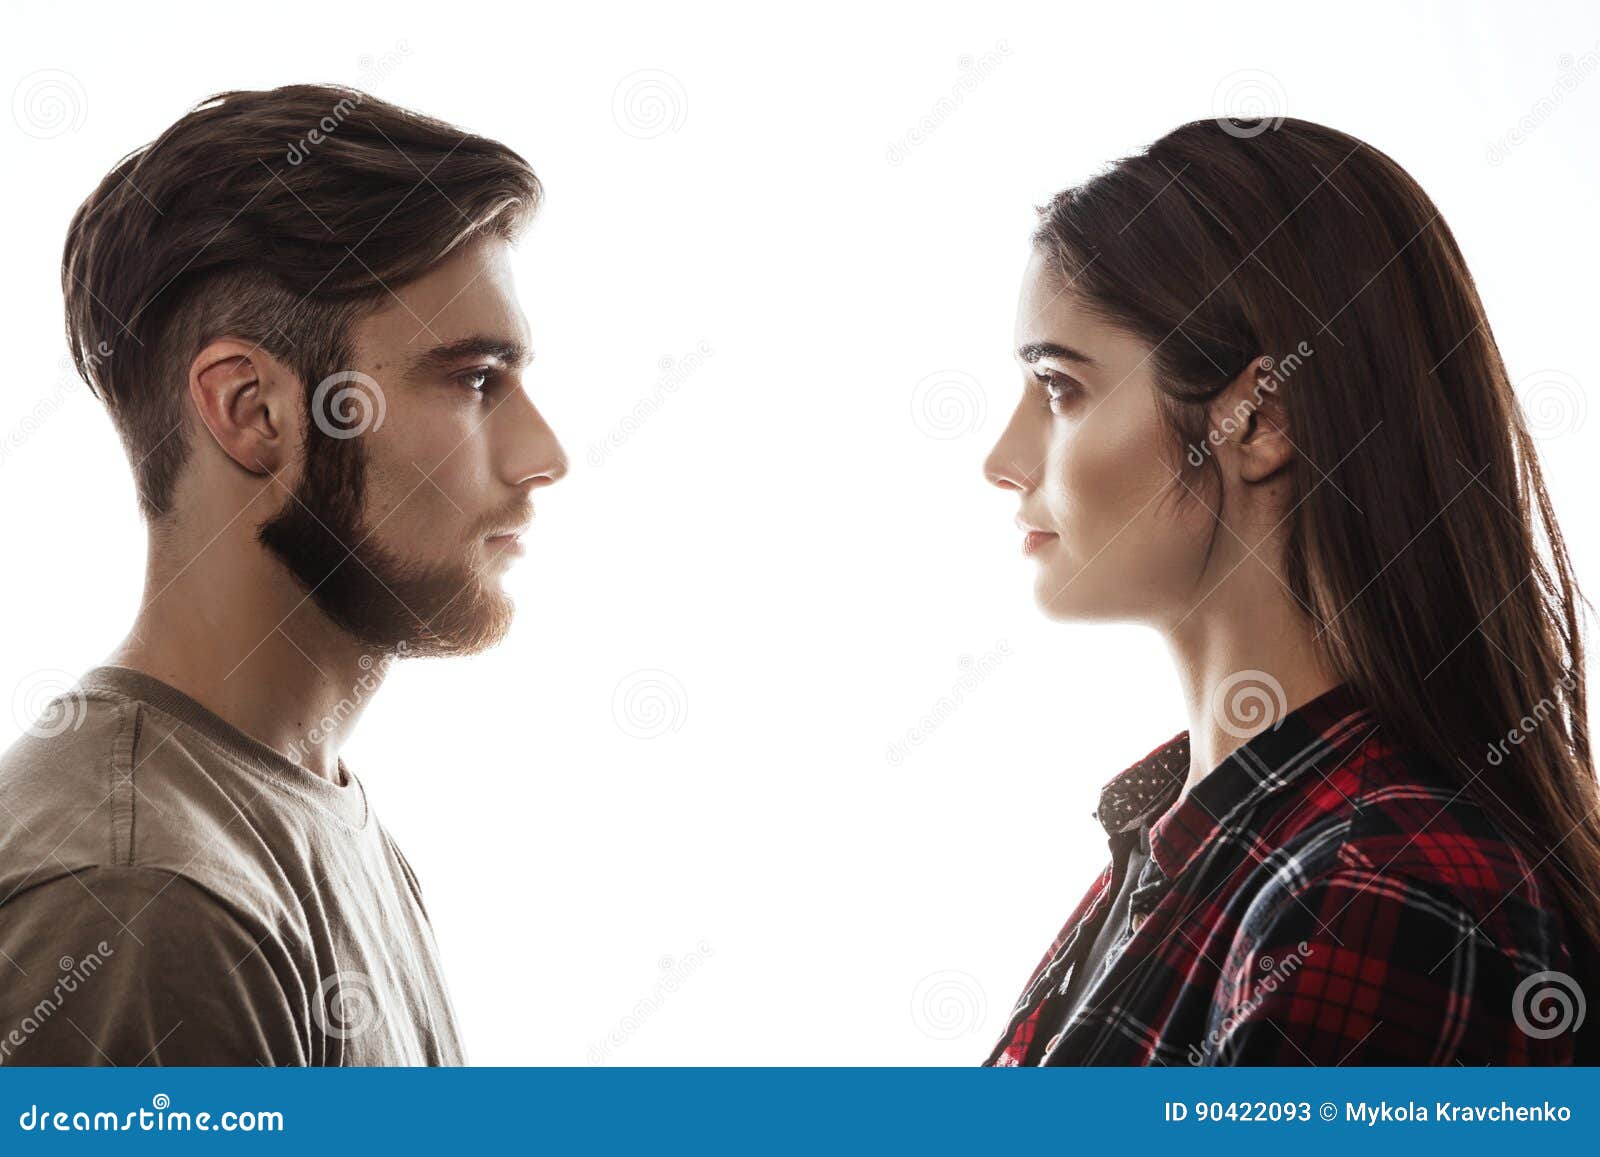 side view. man and woman facing each other, eyes open.